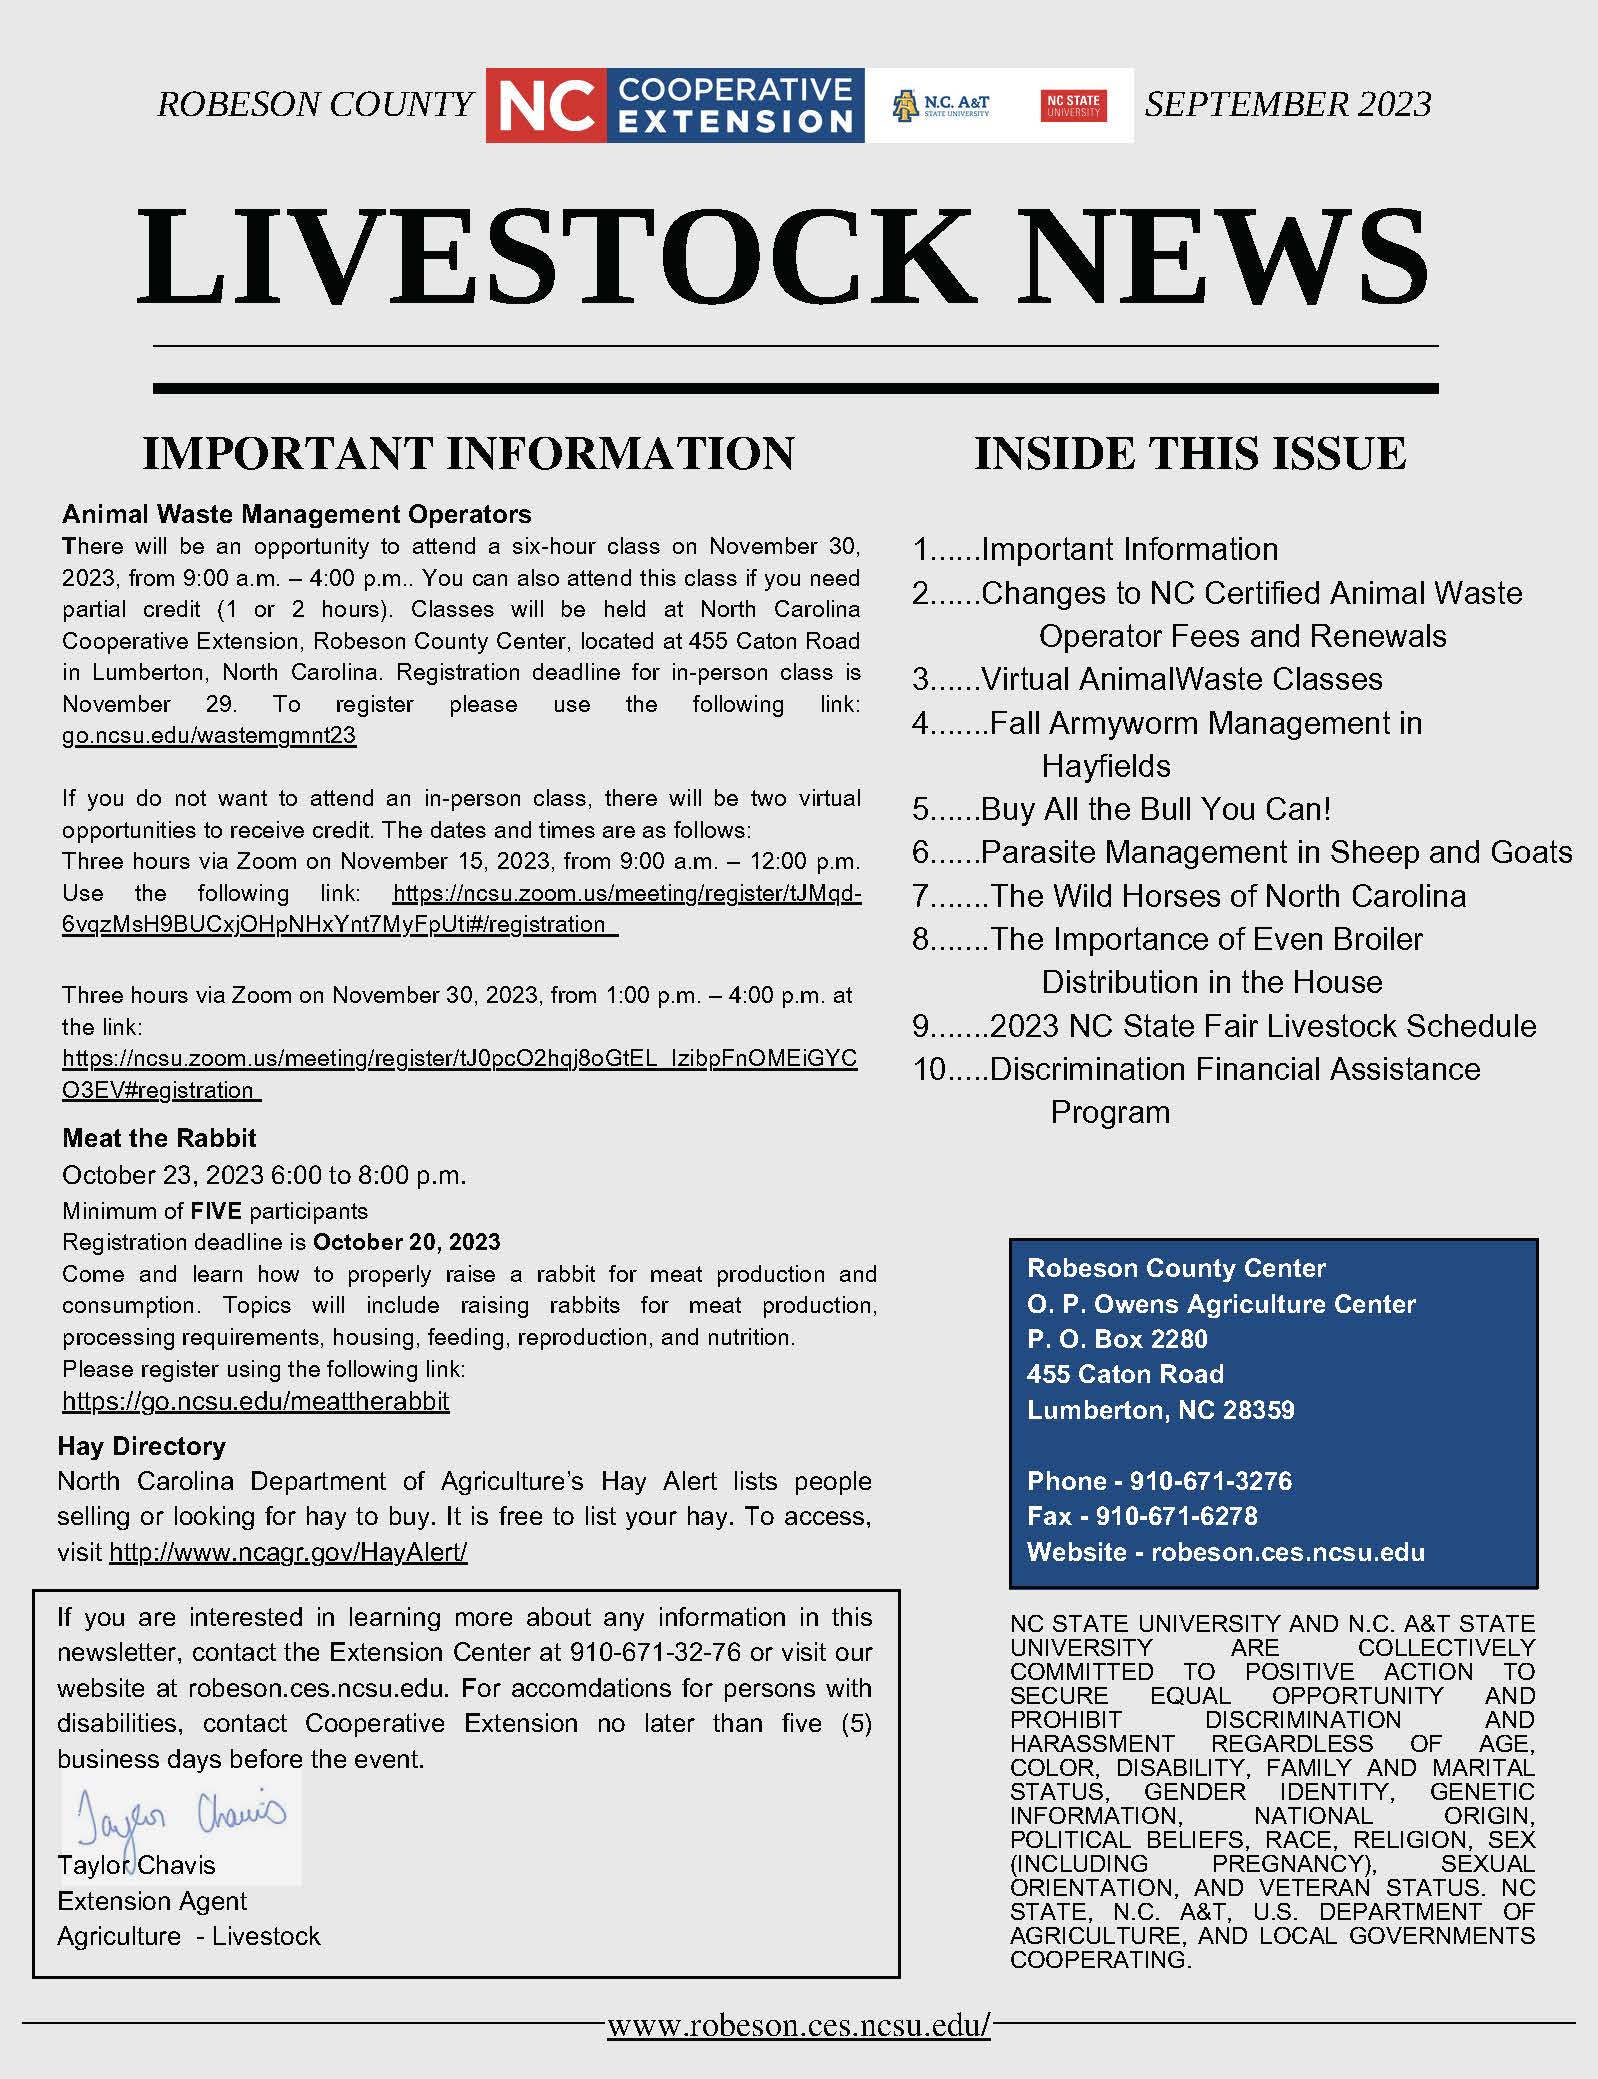 Cover page of fall 23 Livestock Newsletter